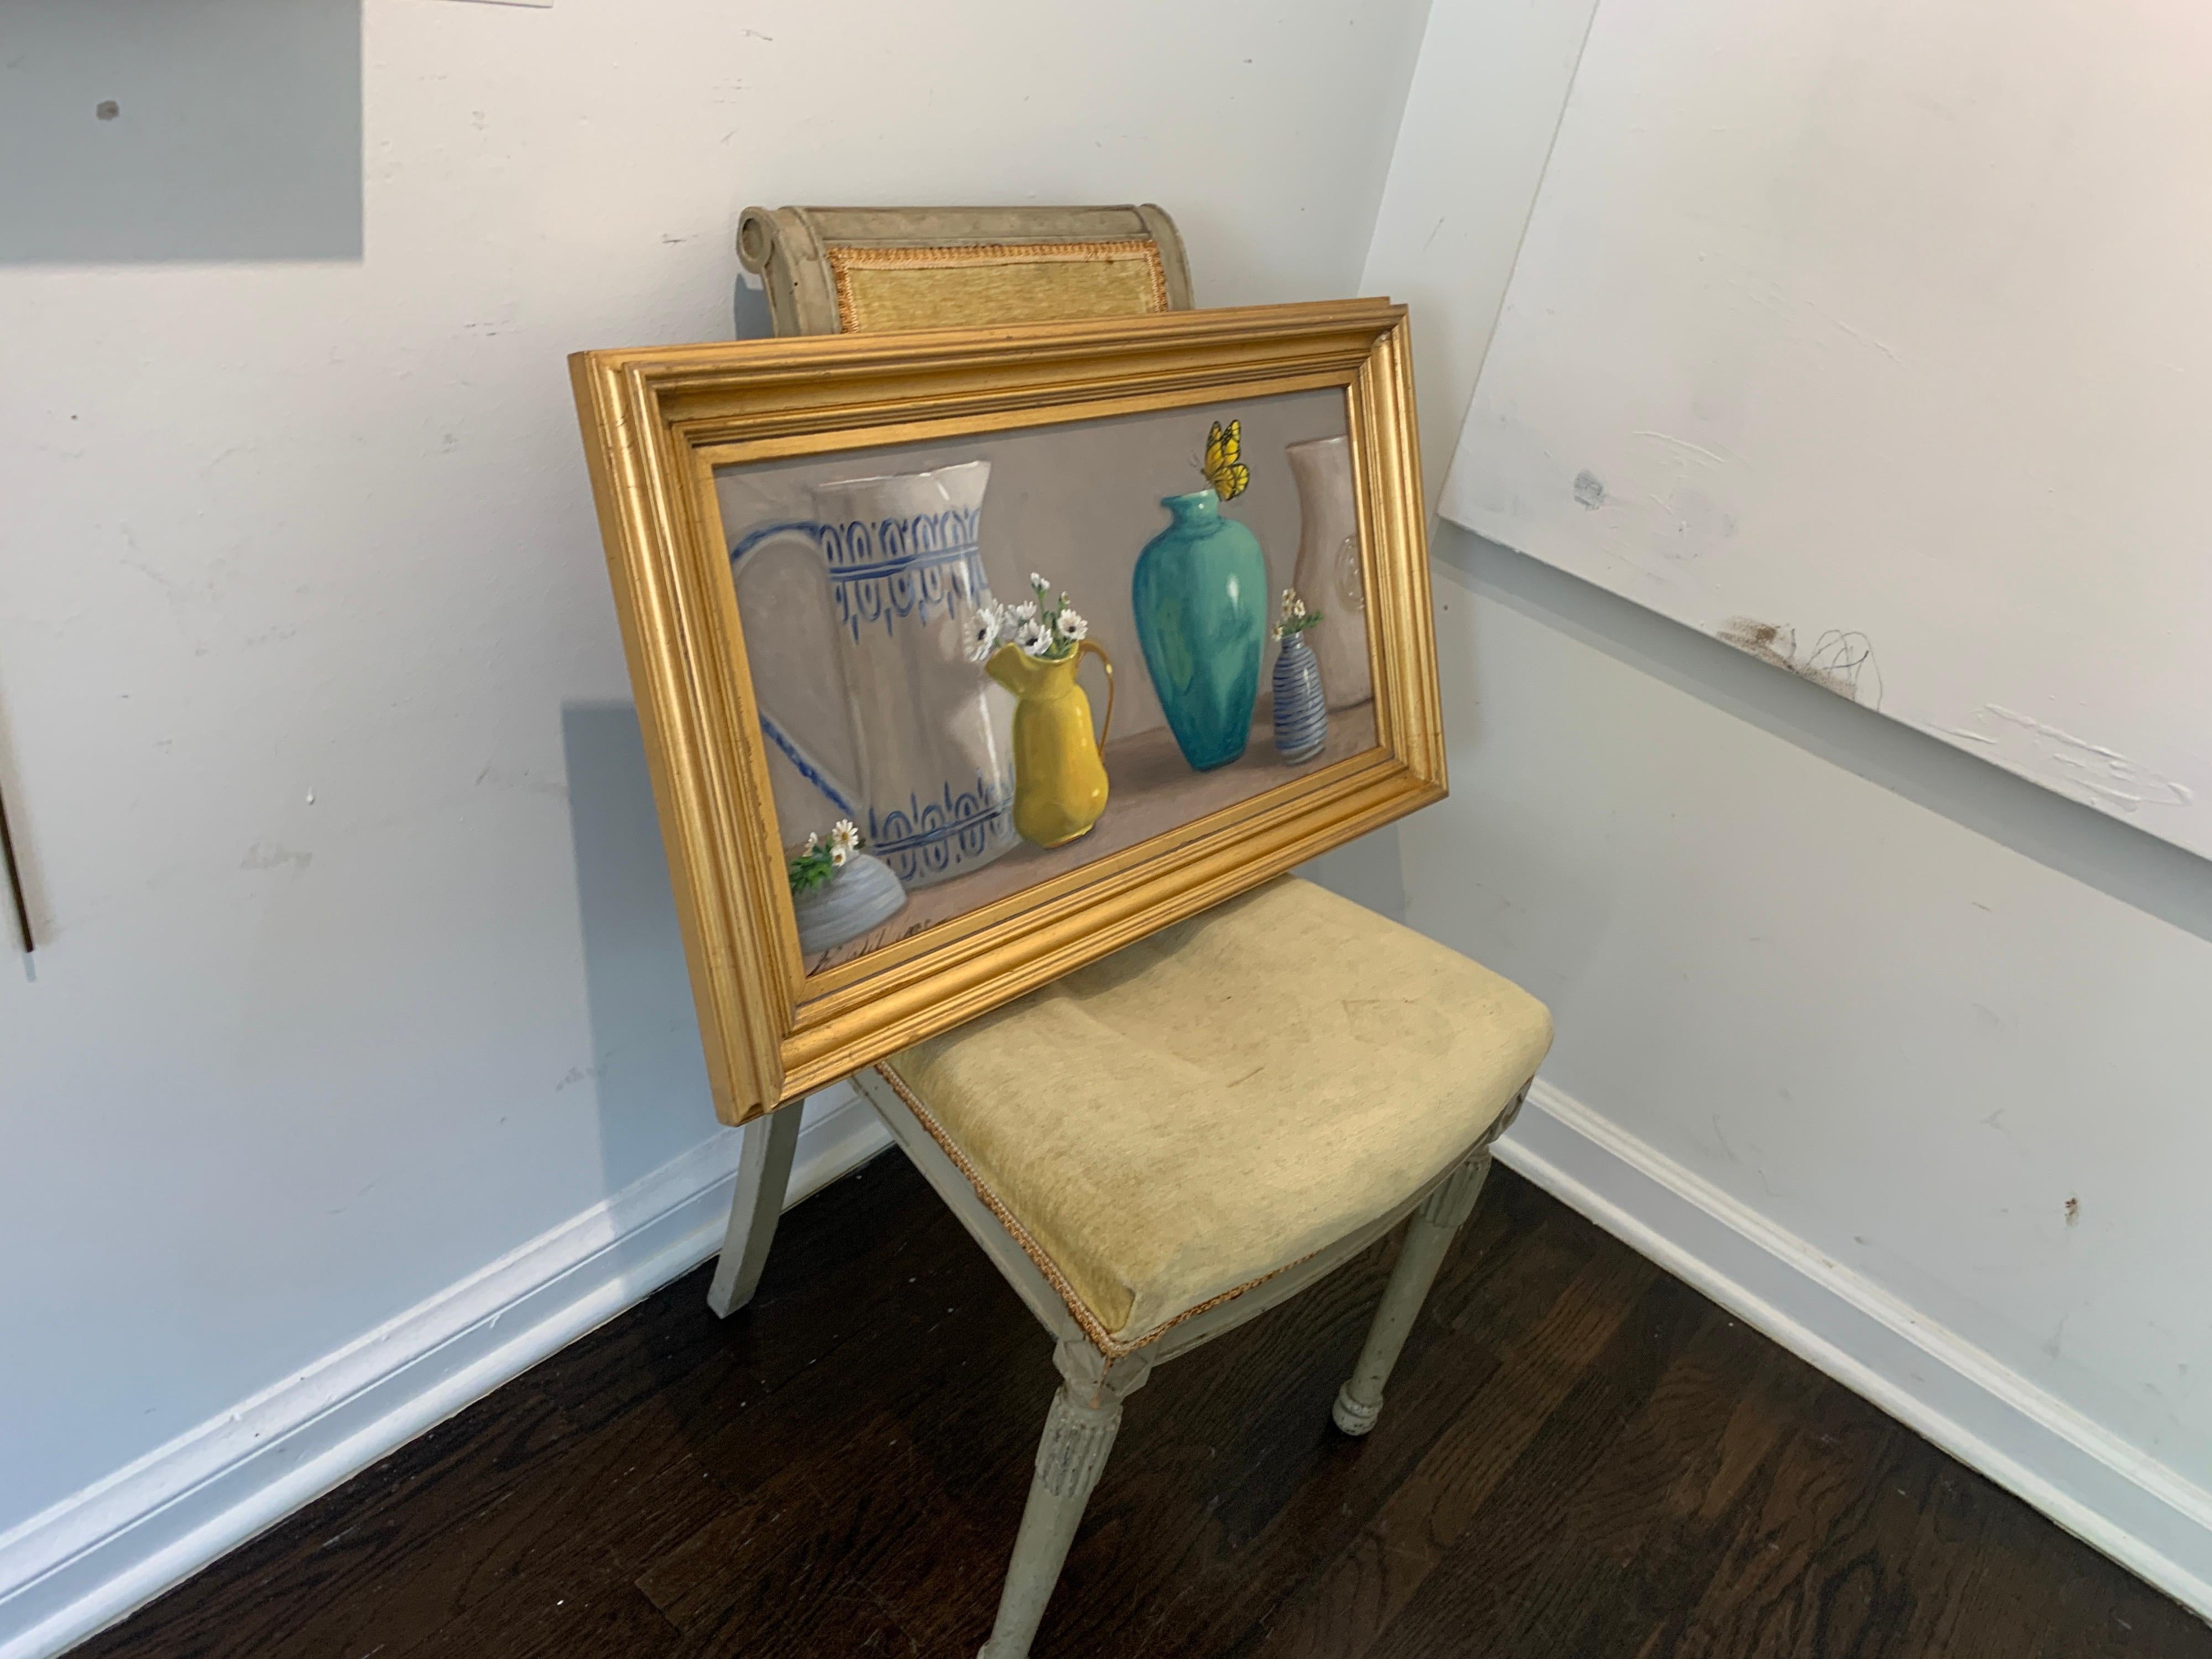 Ginny demonstrates here both her talent as a colorist and her understanding of Old Masters' techniques. Set inside a gold frame with gilt molding, this small horizontal format is signed lower left. Without its frame, this oil on canvas painting